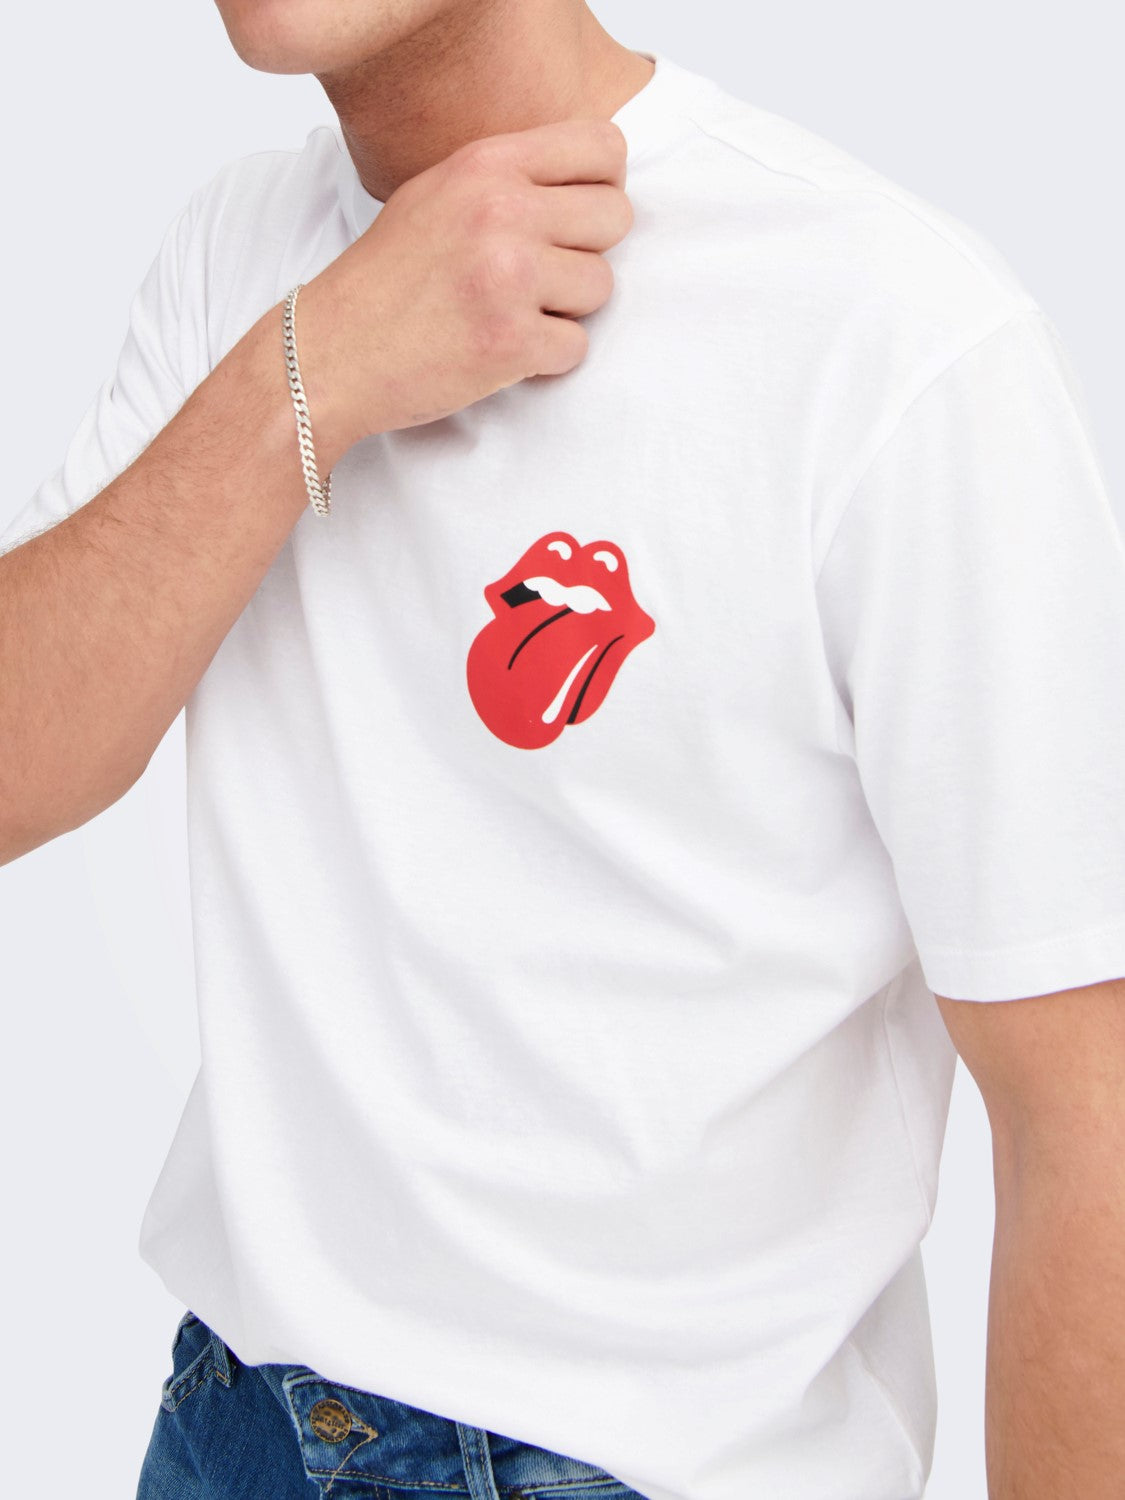 T-SHIRT RELAXED "ROLLING STONES" - Col. bianco